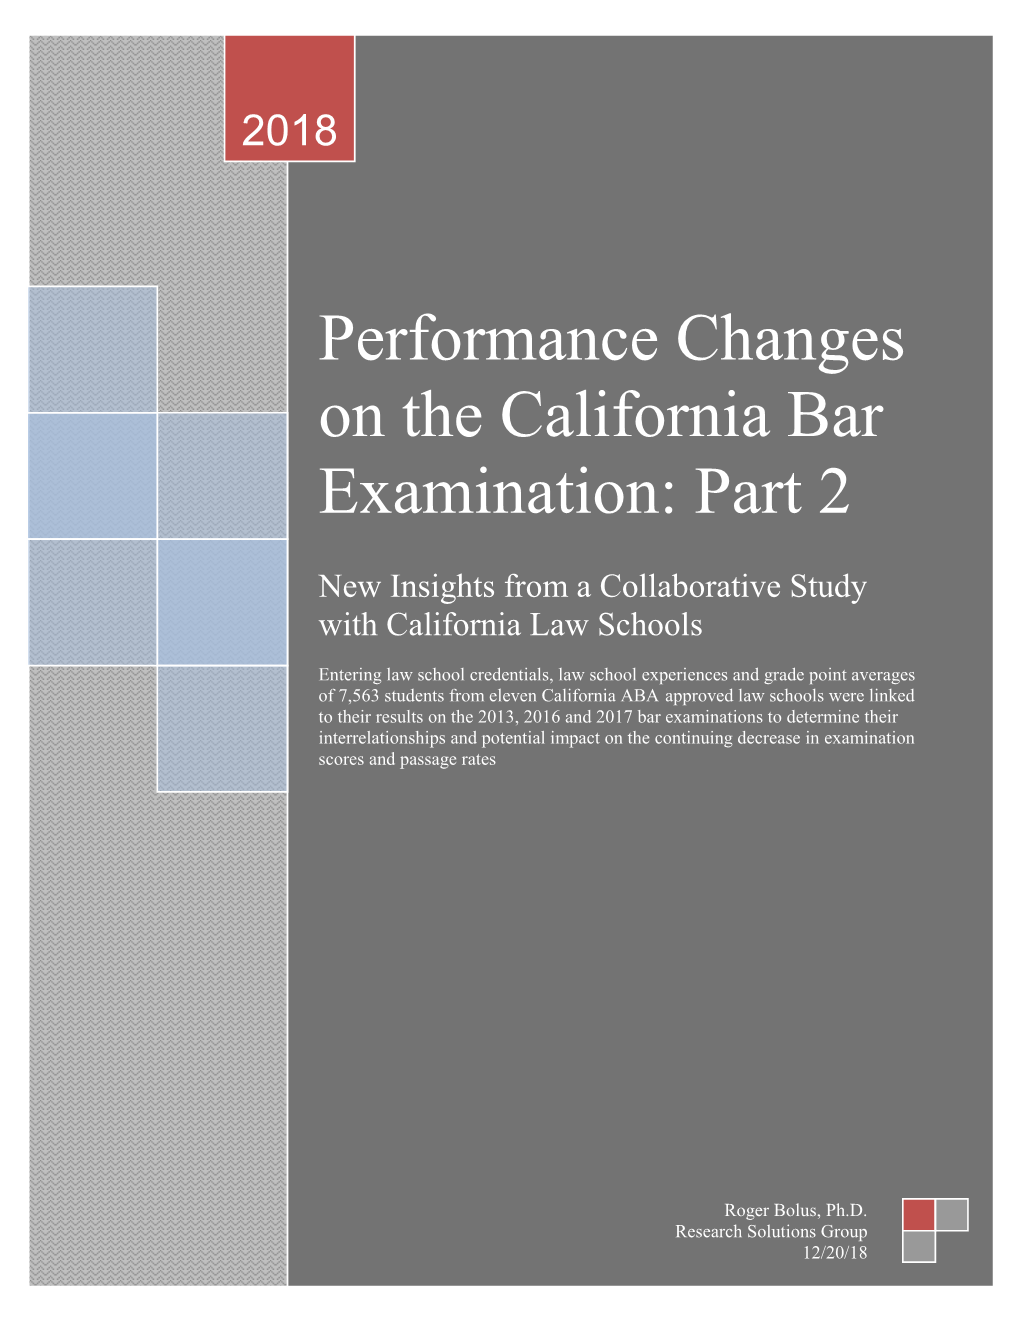 Performance Changes on the California Bar Examination: Part 2